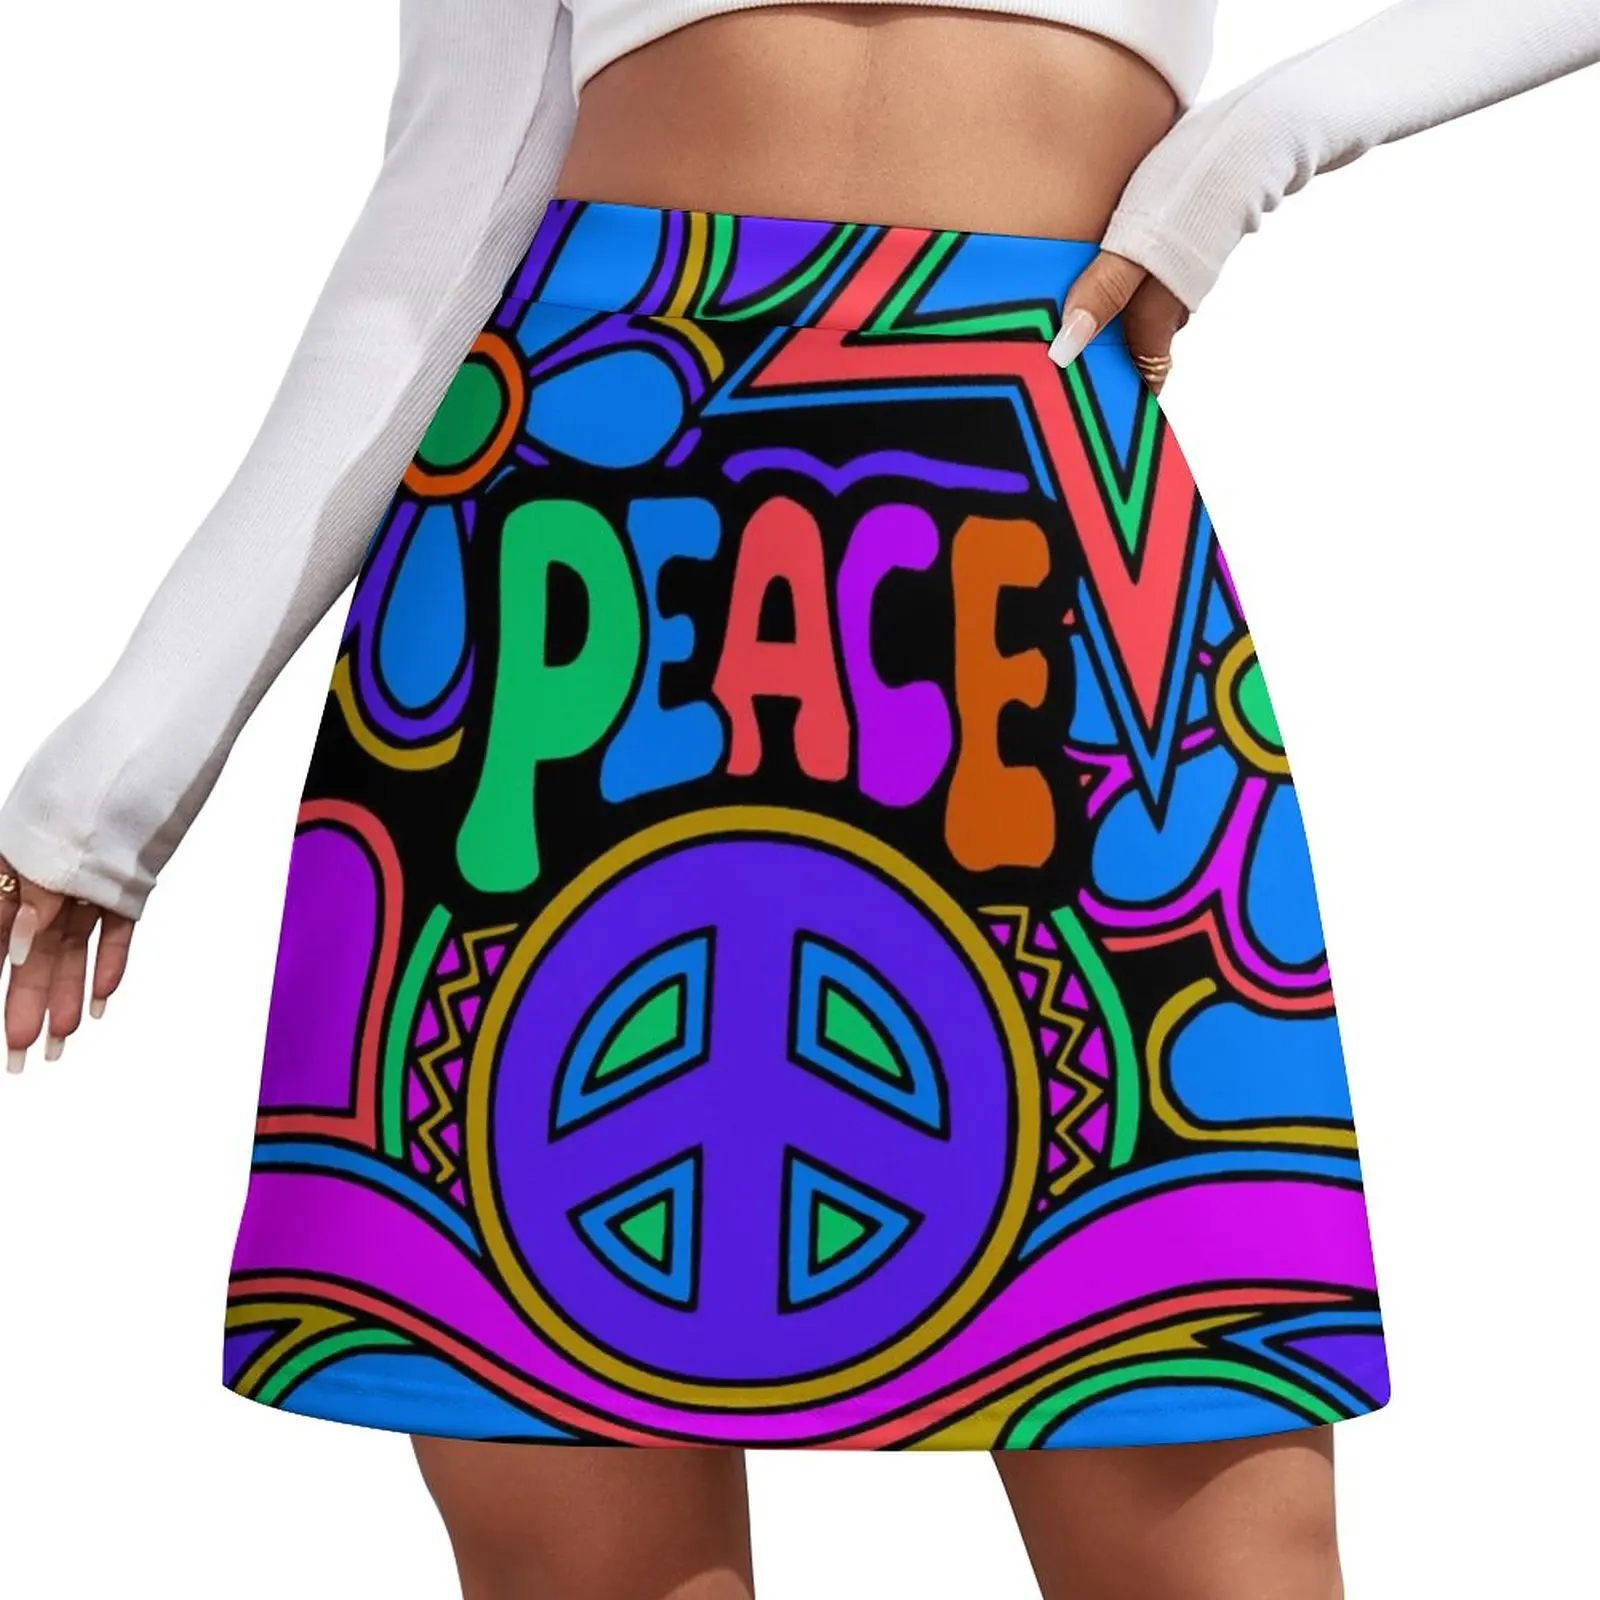 Peace and Love Flowers and Stars Hippie Design Mini Skirt Female clothing Short skirt woman peace orchestra reset 1 cd